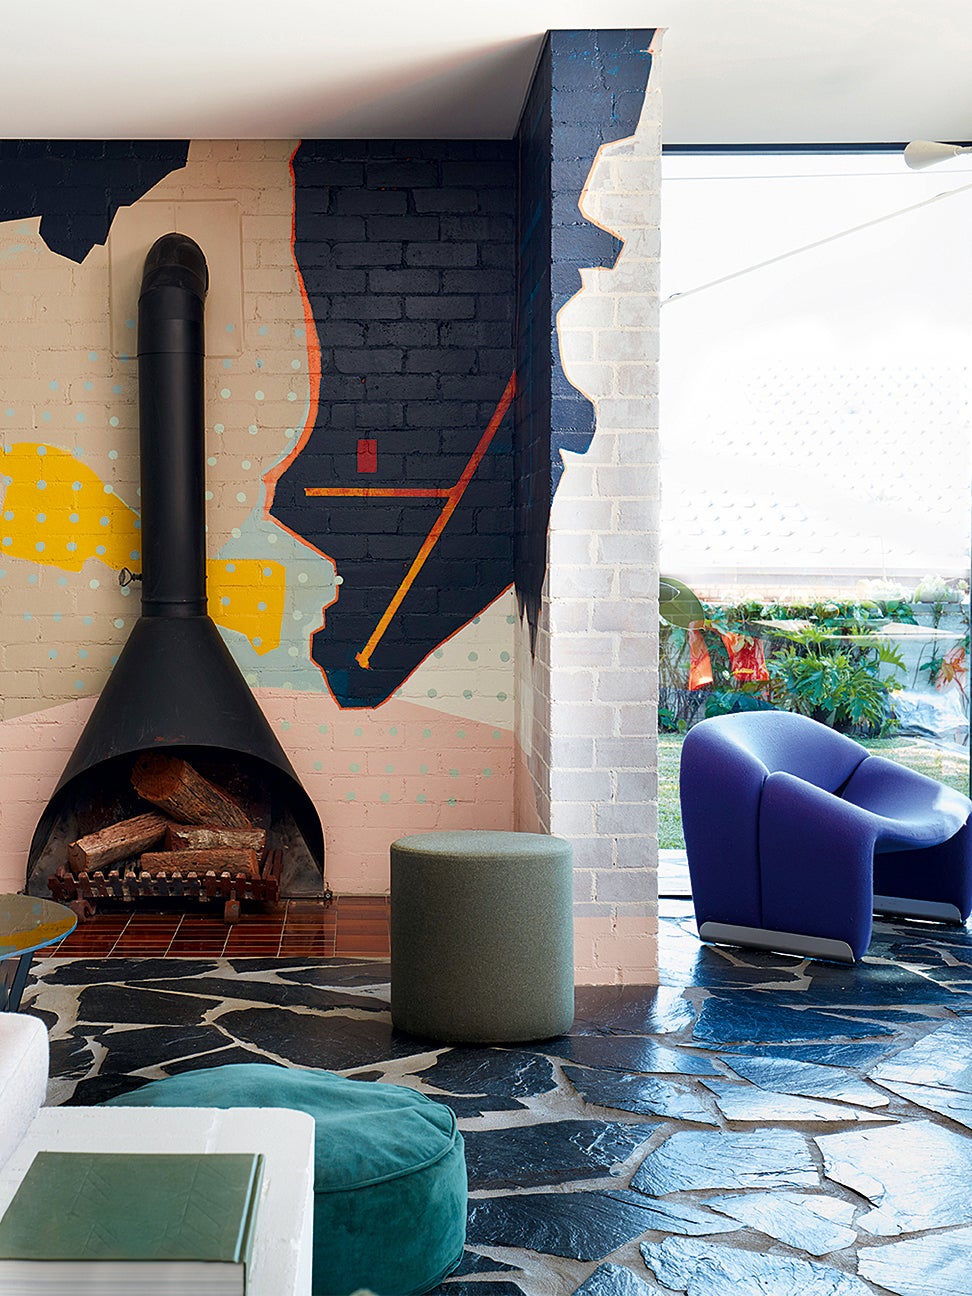 Hand-painted mural in midcentury home